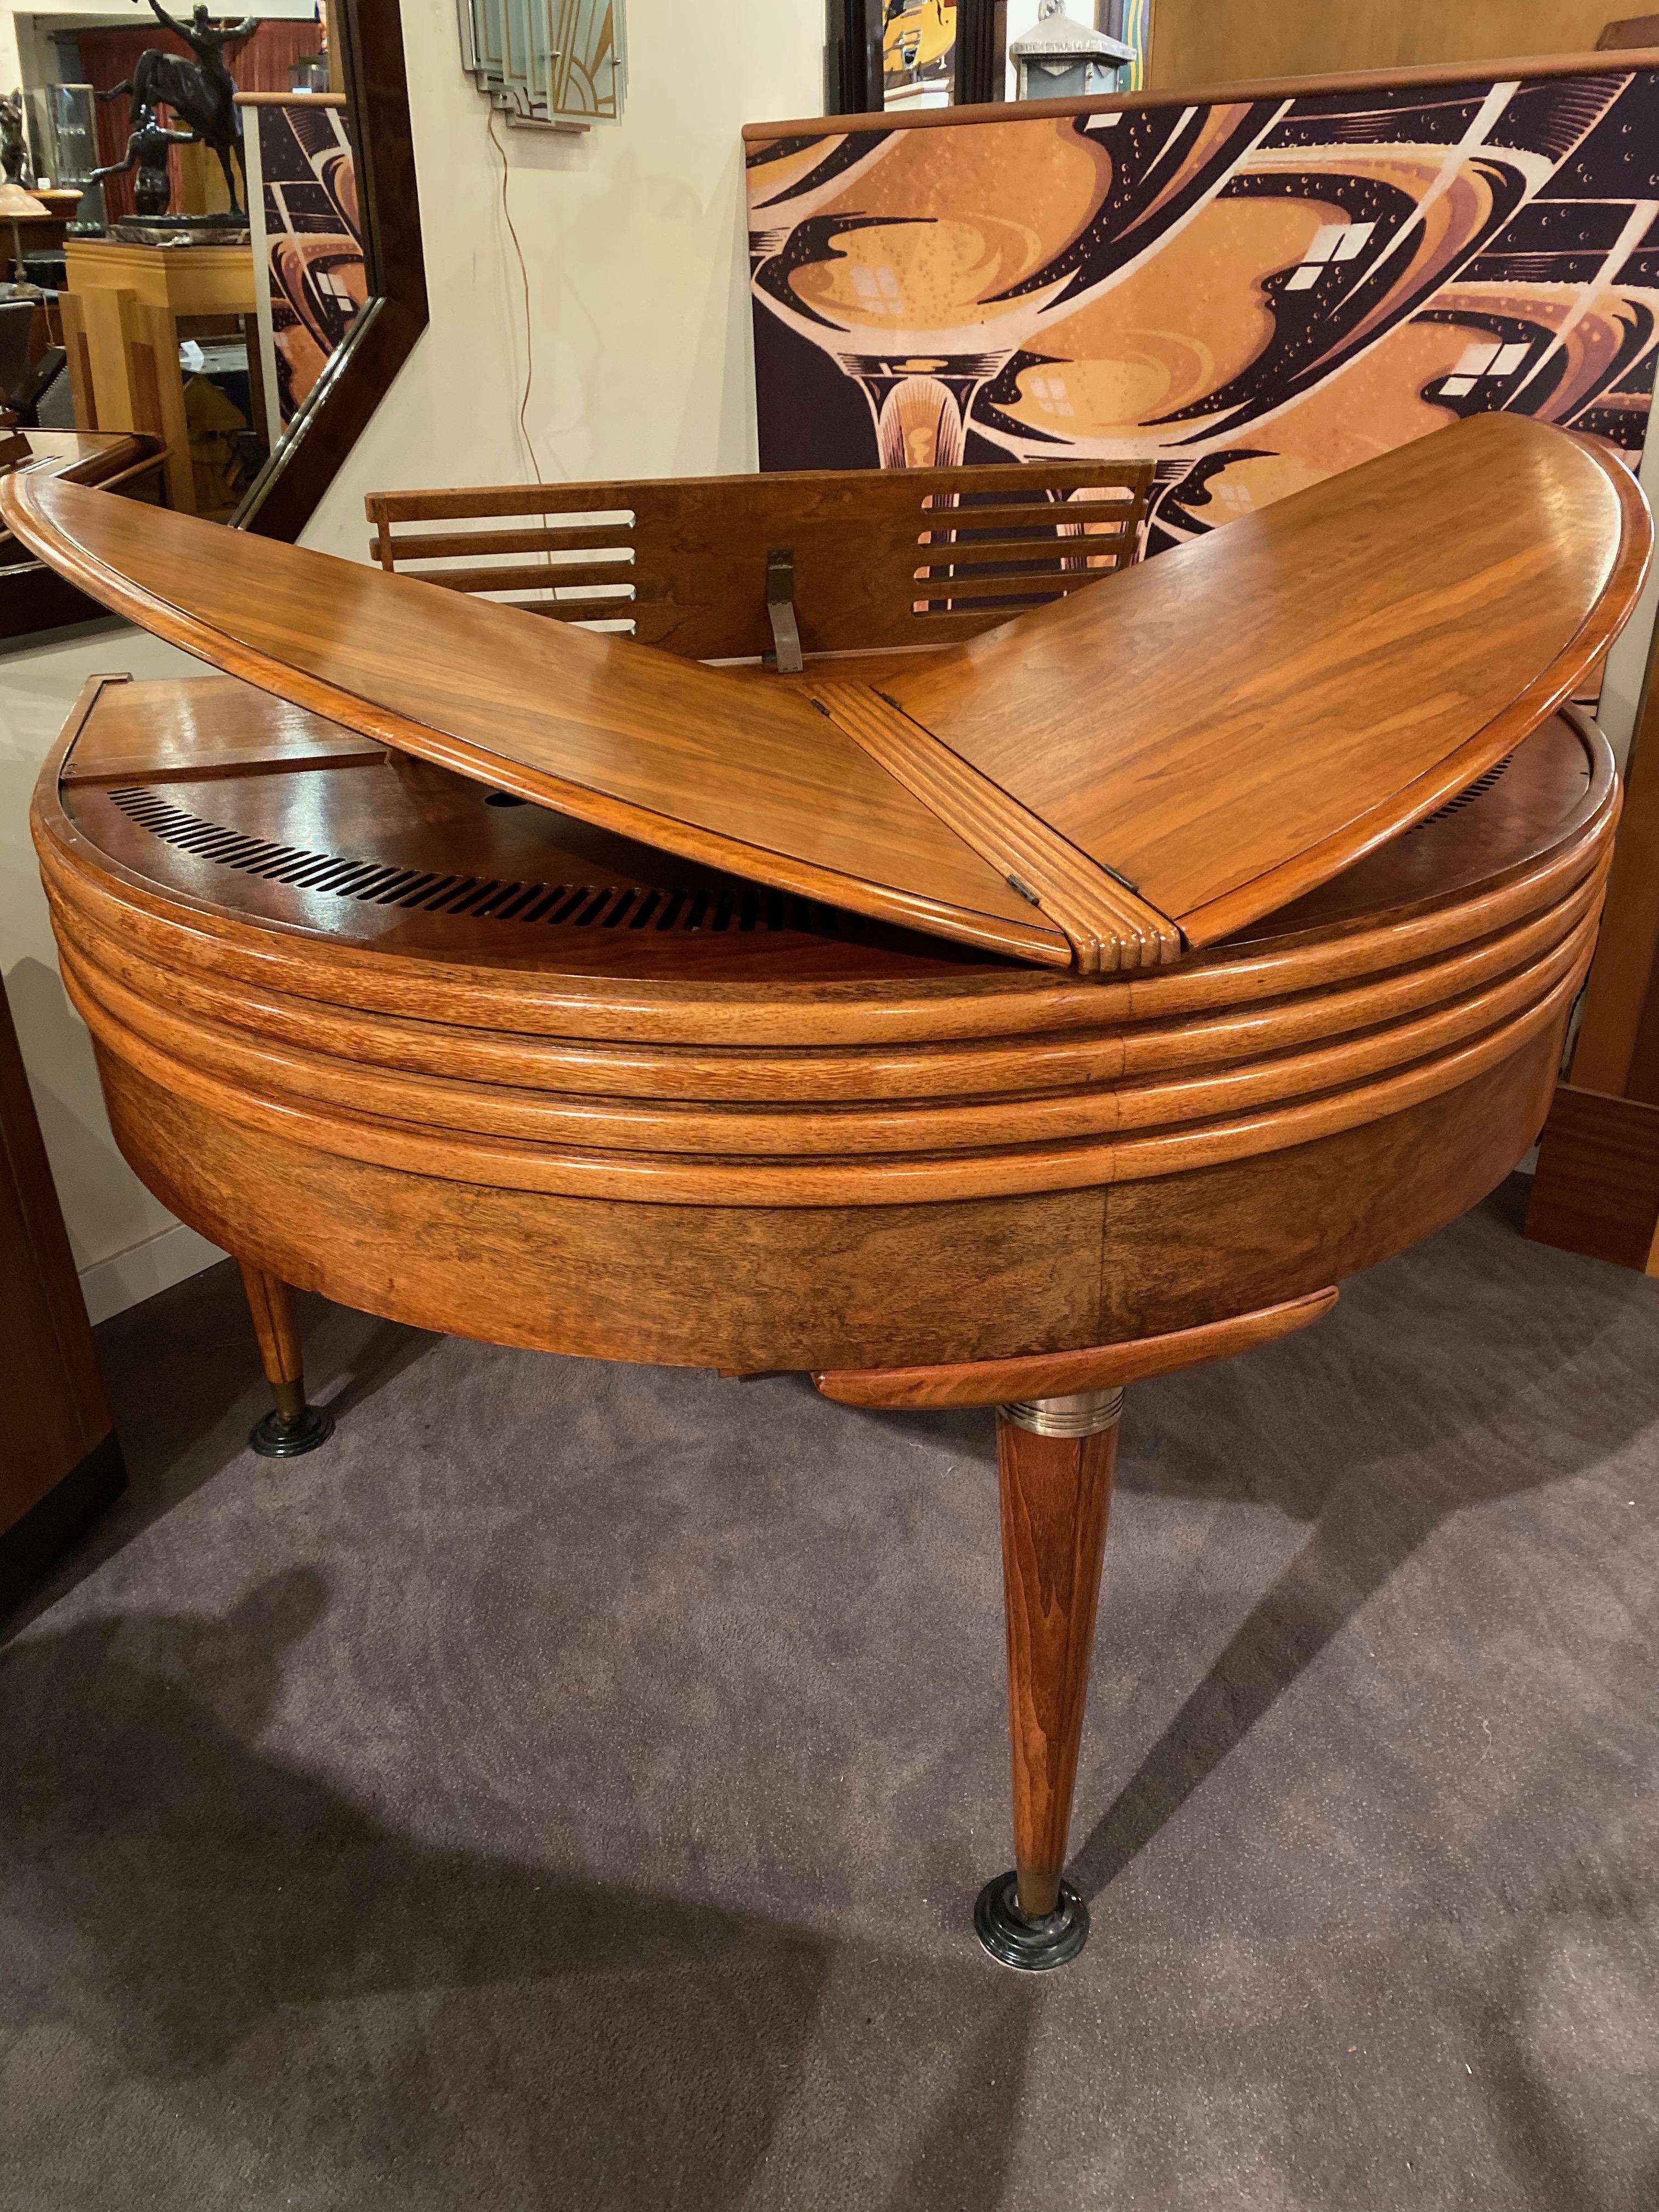 This 1937 streamline Art Deco butterfly Wurlitzer baby grand piano original finish and remarkable condition. Wurlitzer 88 key deluxe has been positively identified as the style 1411. Of the Wurlitzer butterfly pianos, this model has the best